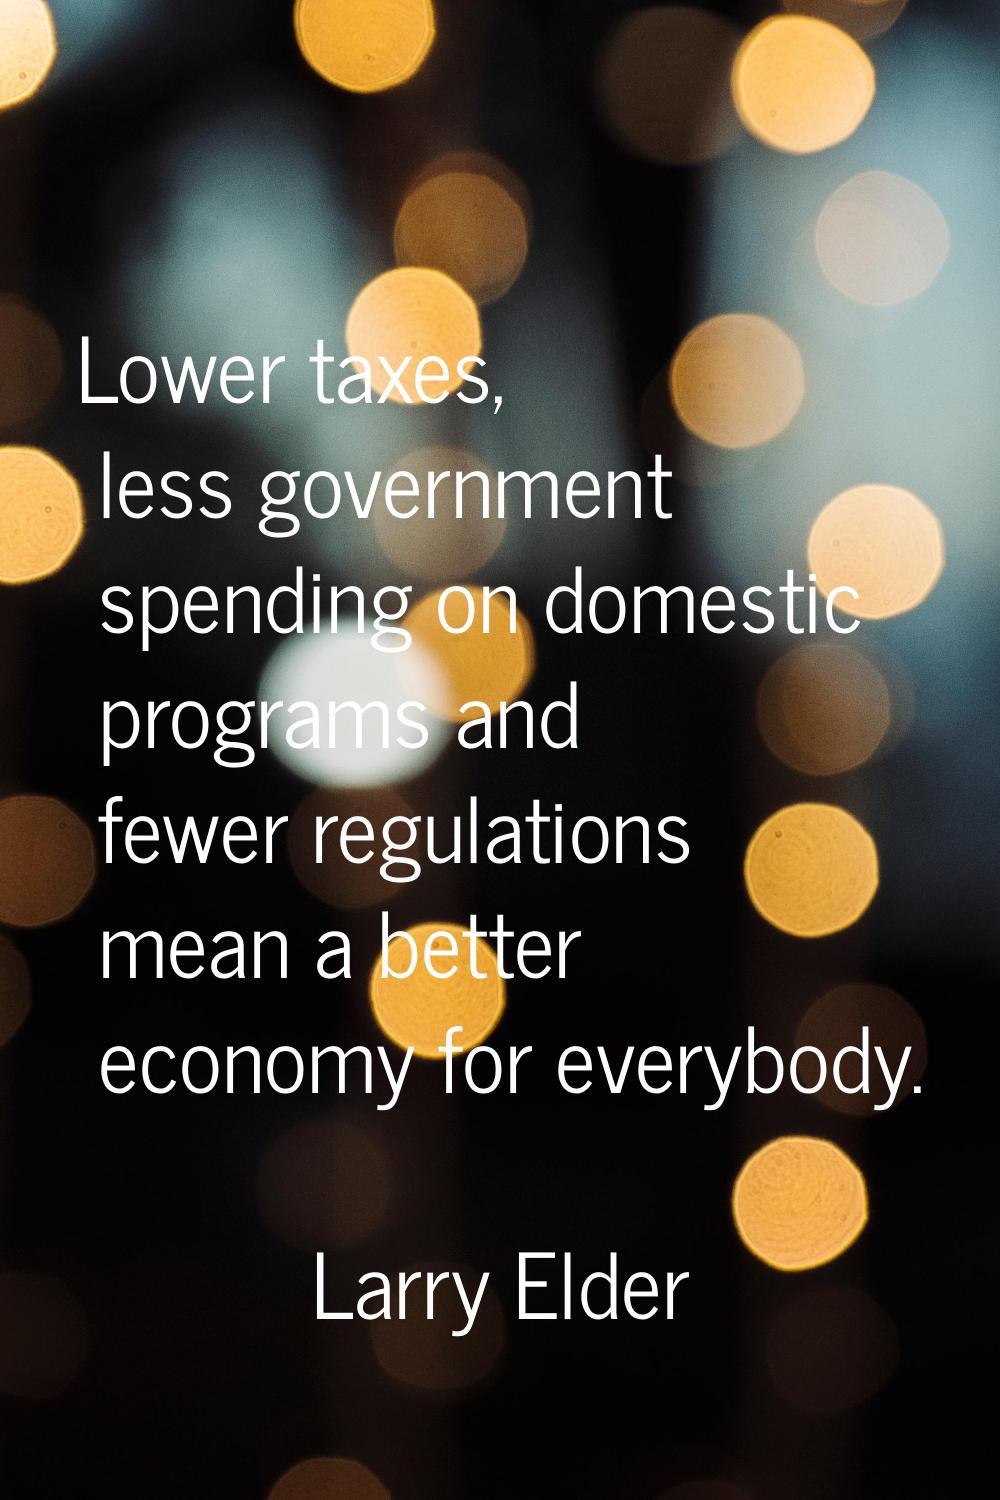 Lower taxes, less government spending on domestic programs and fewer regulations mean a better econ